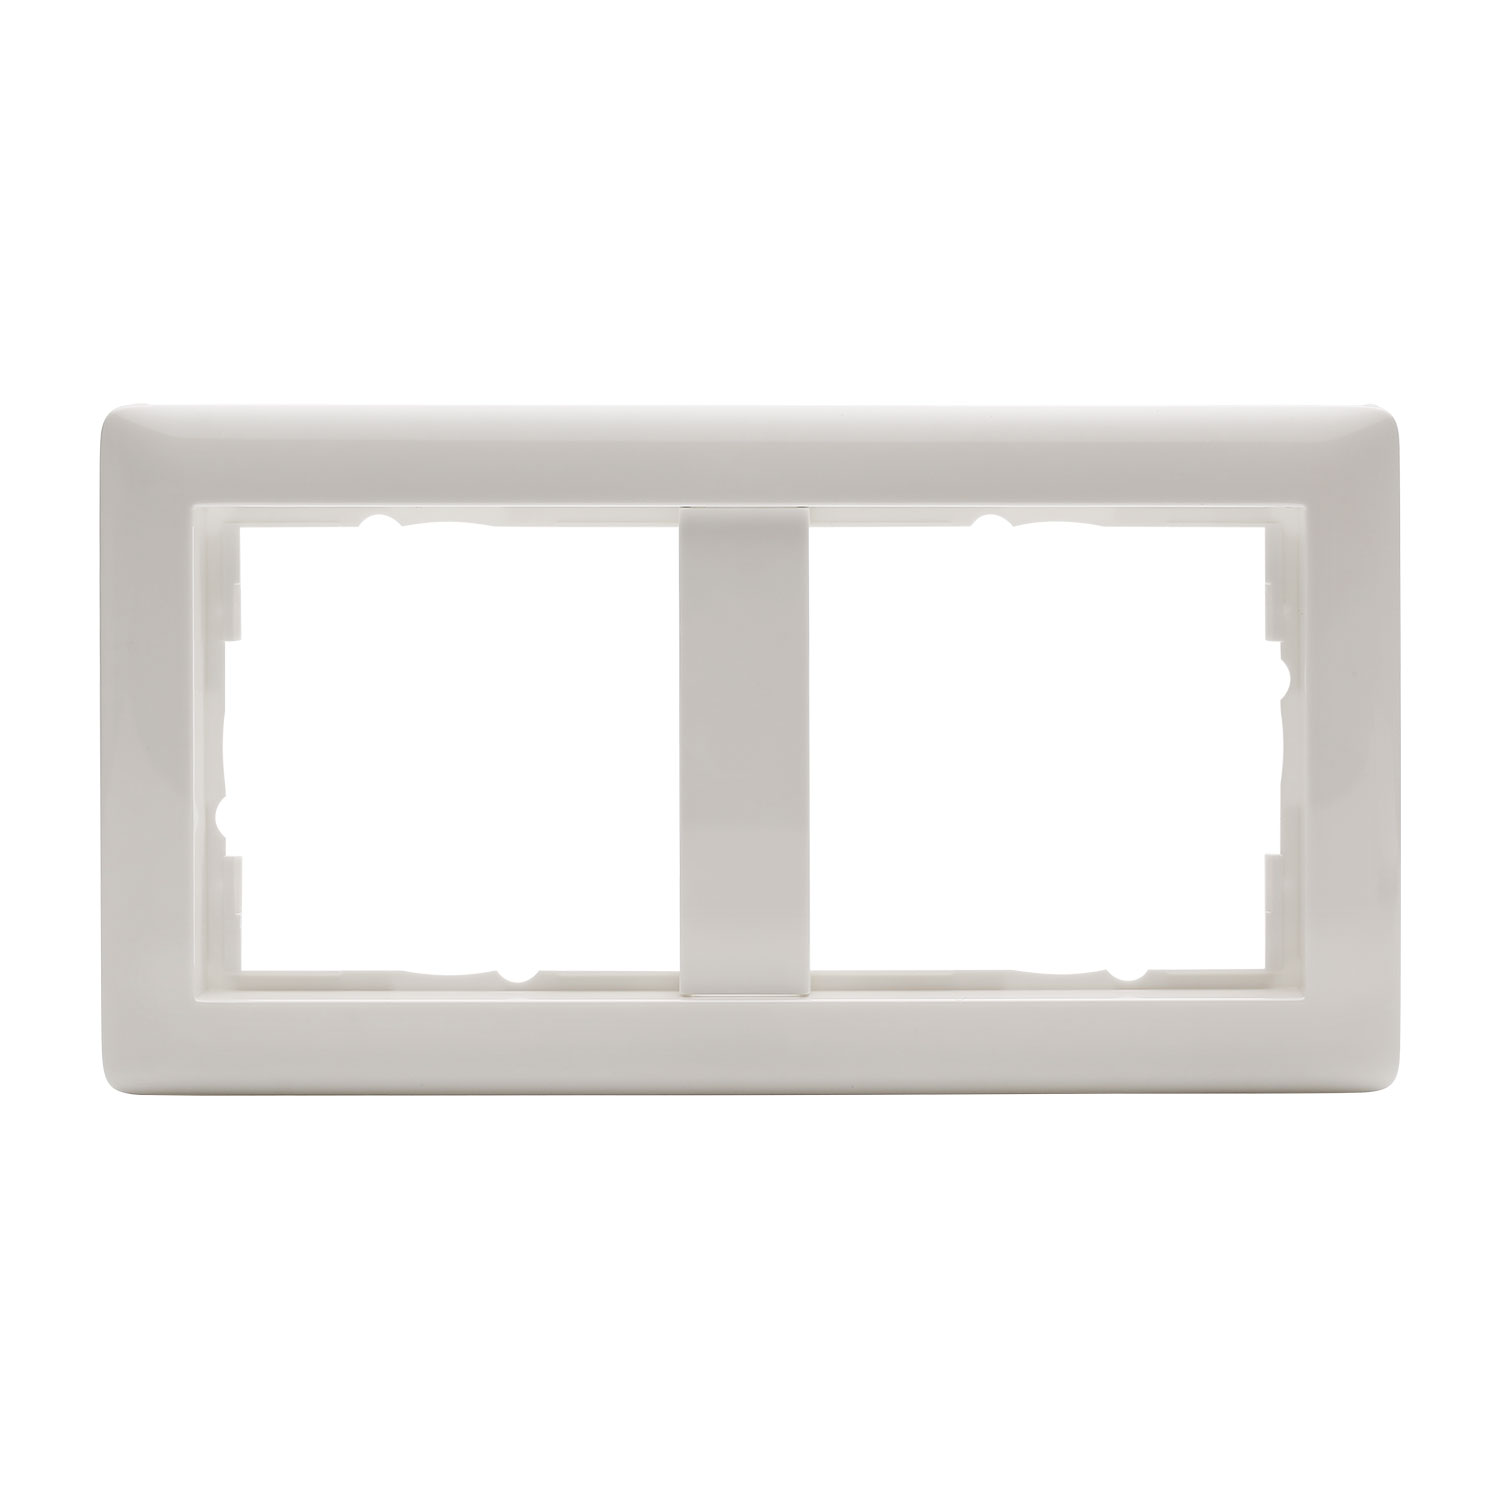 Switch frames, 2-way , scale: 55x55 mm, plastic, colour: white